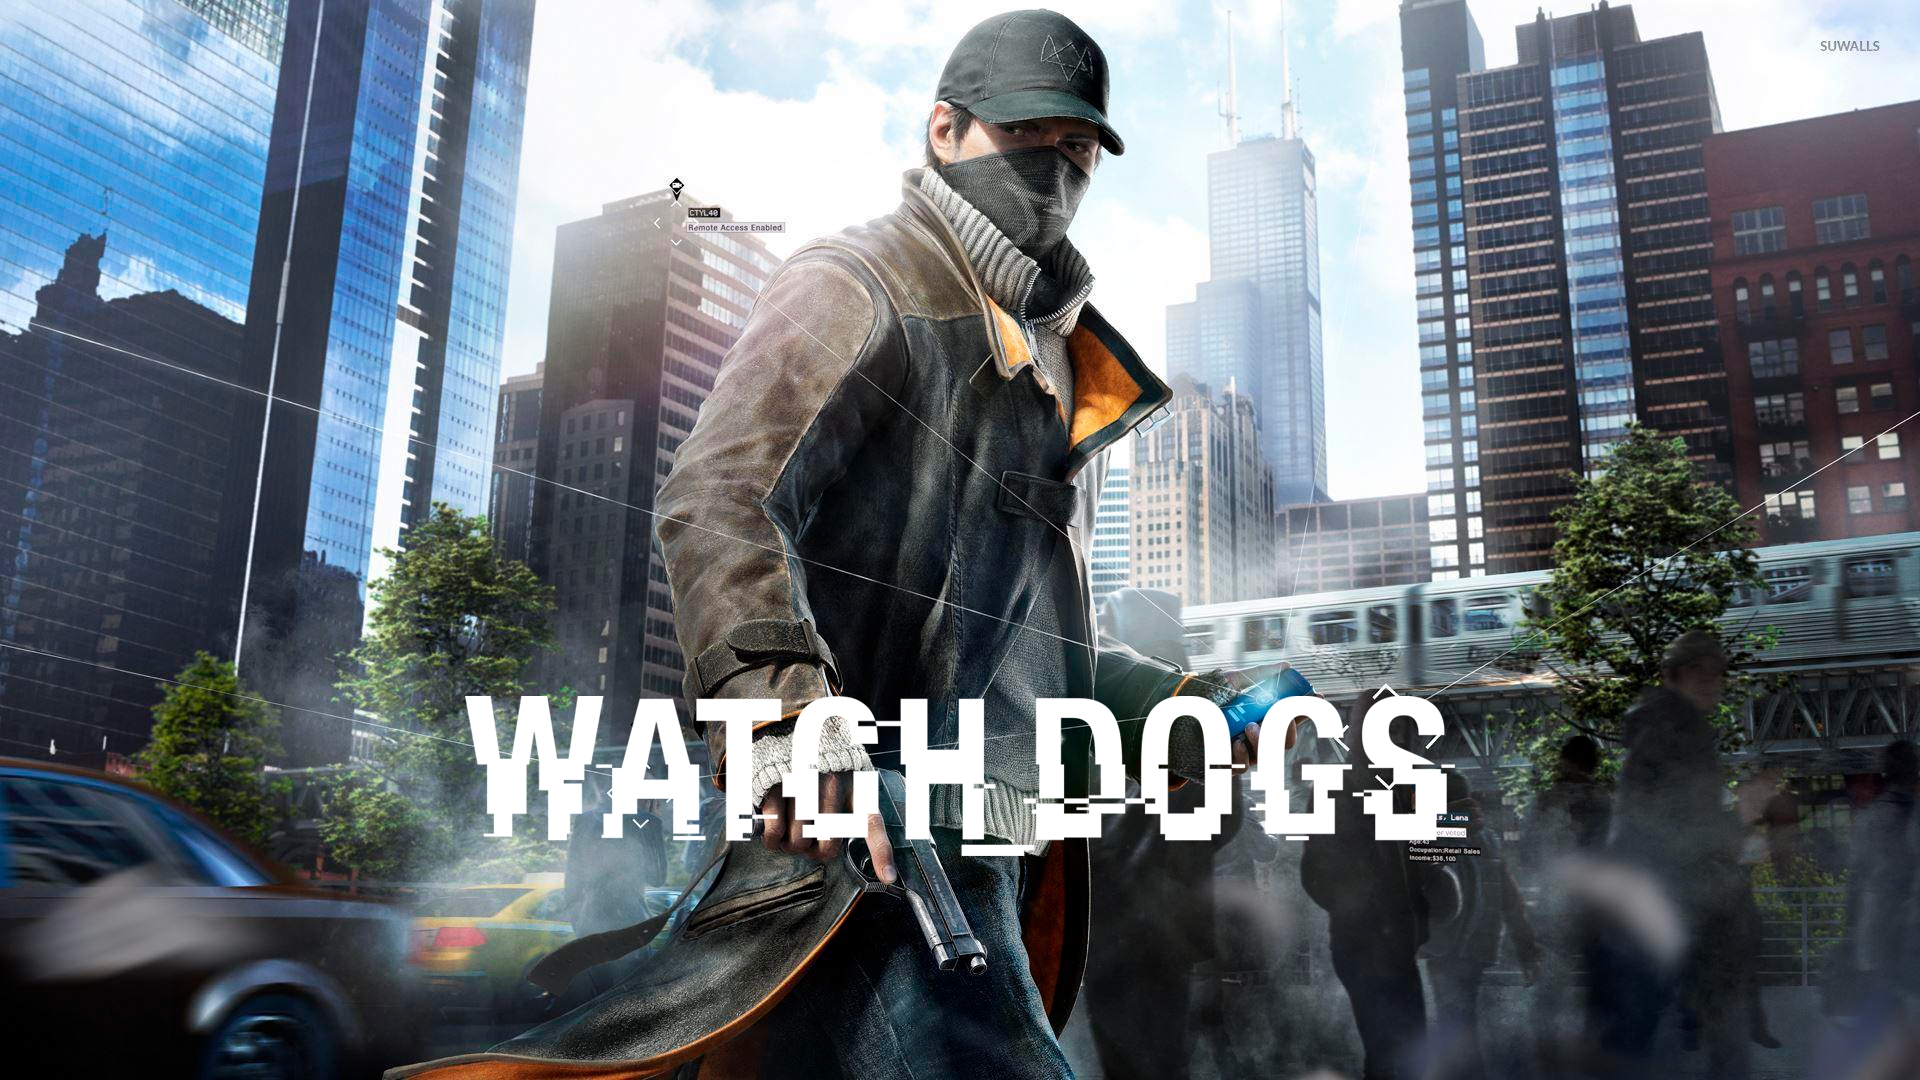 watch-dogs-pc-game-ubisoft-connect-europe-cover.jpg